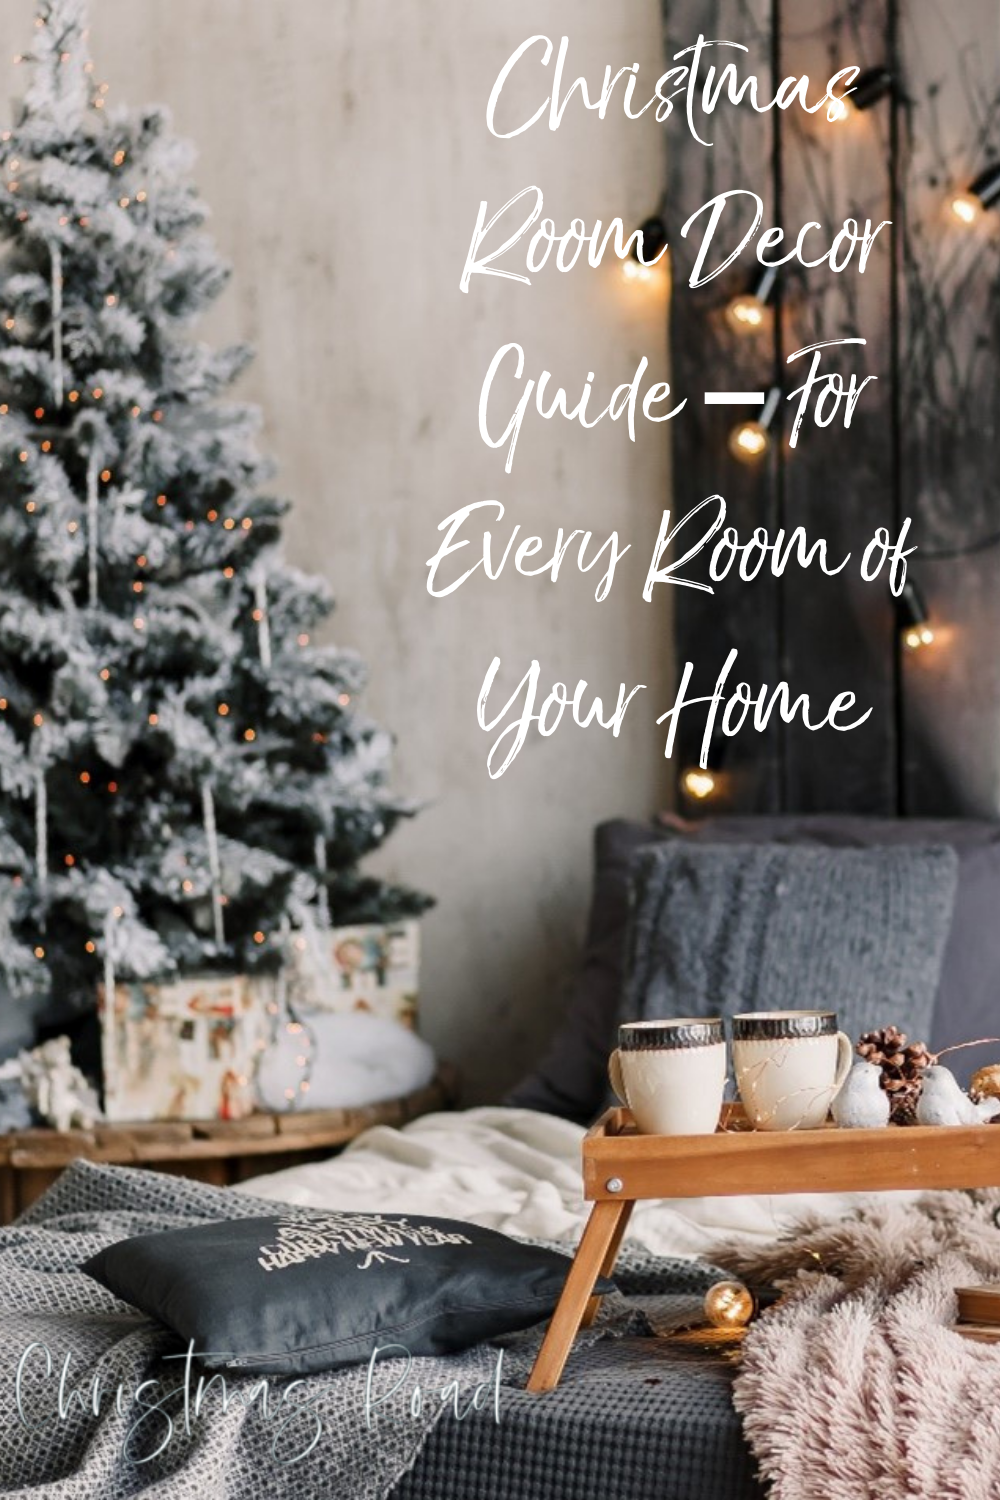 Christmas Room Decor Guide – For Every Room of Your Home